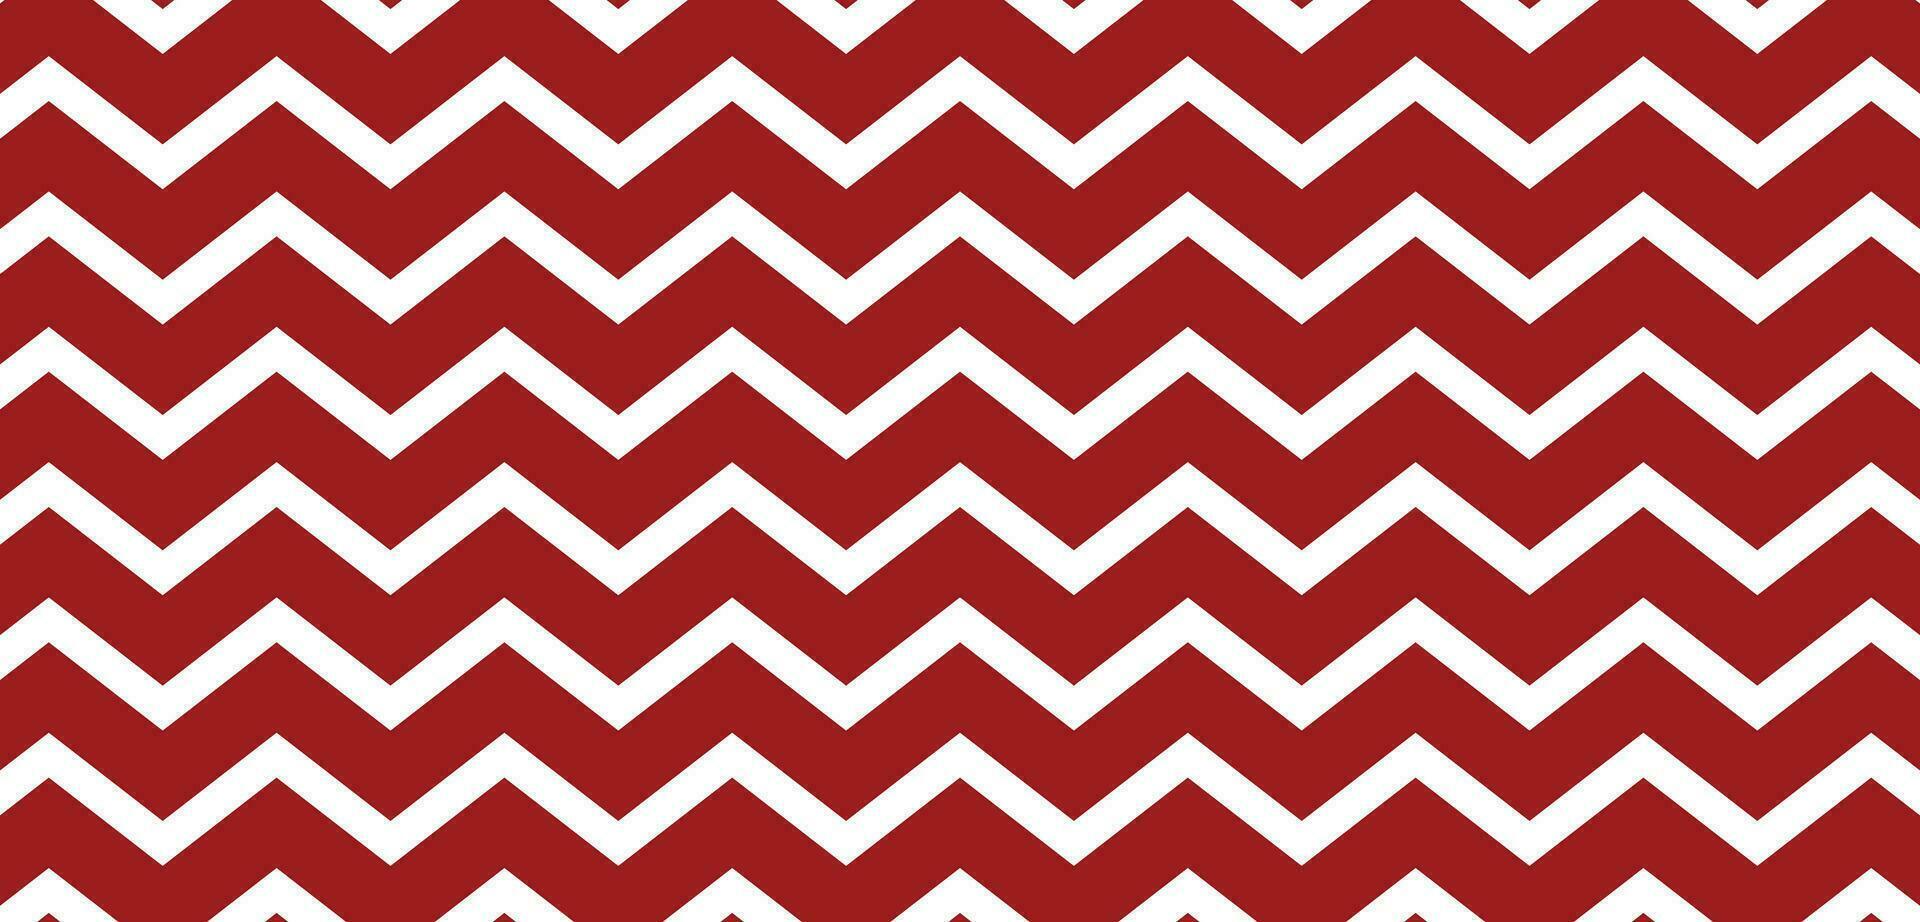 Chirstmas background zig zag with red and white color vector